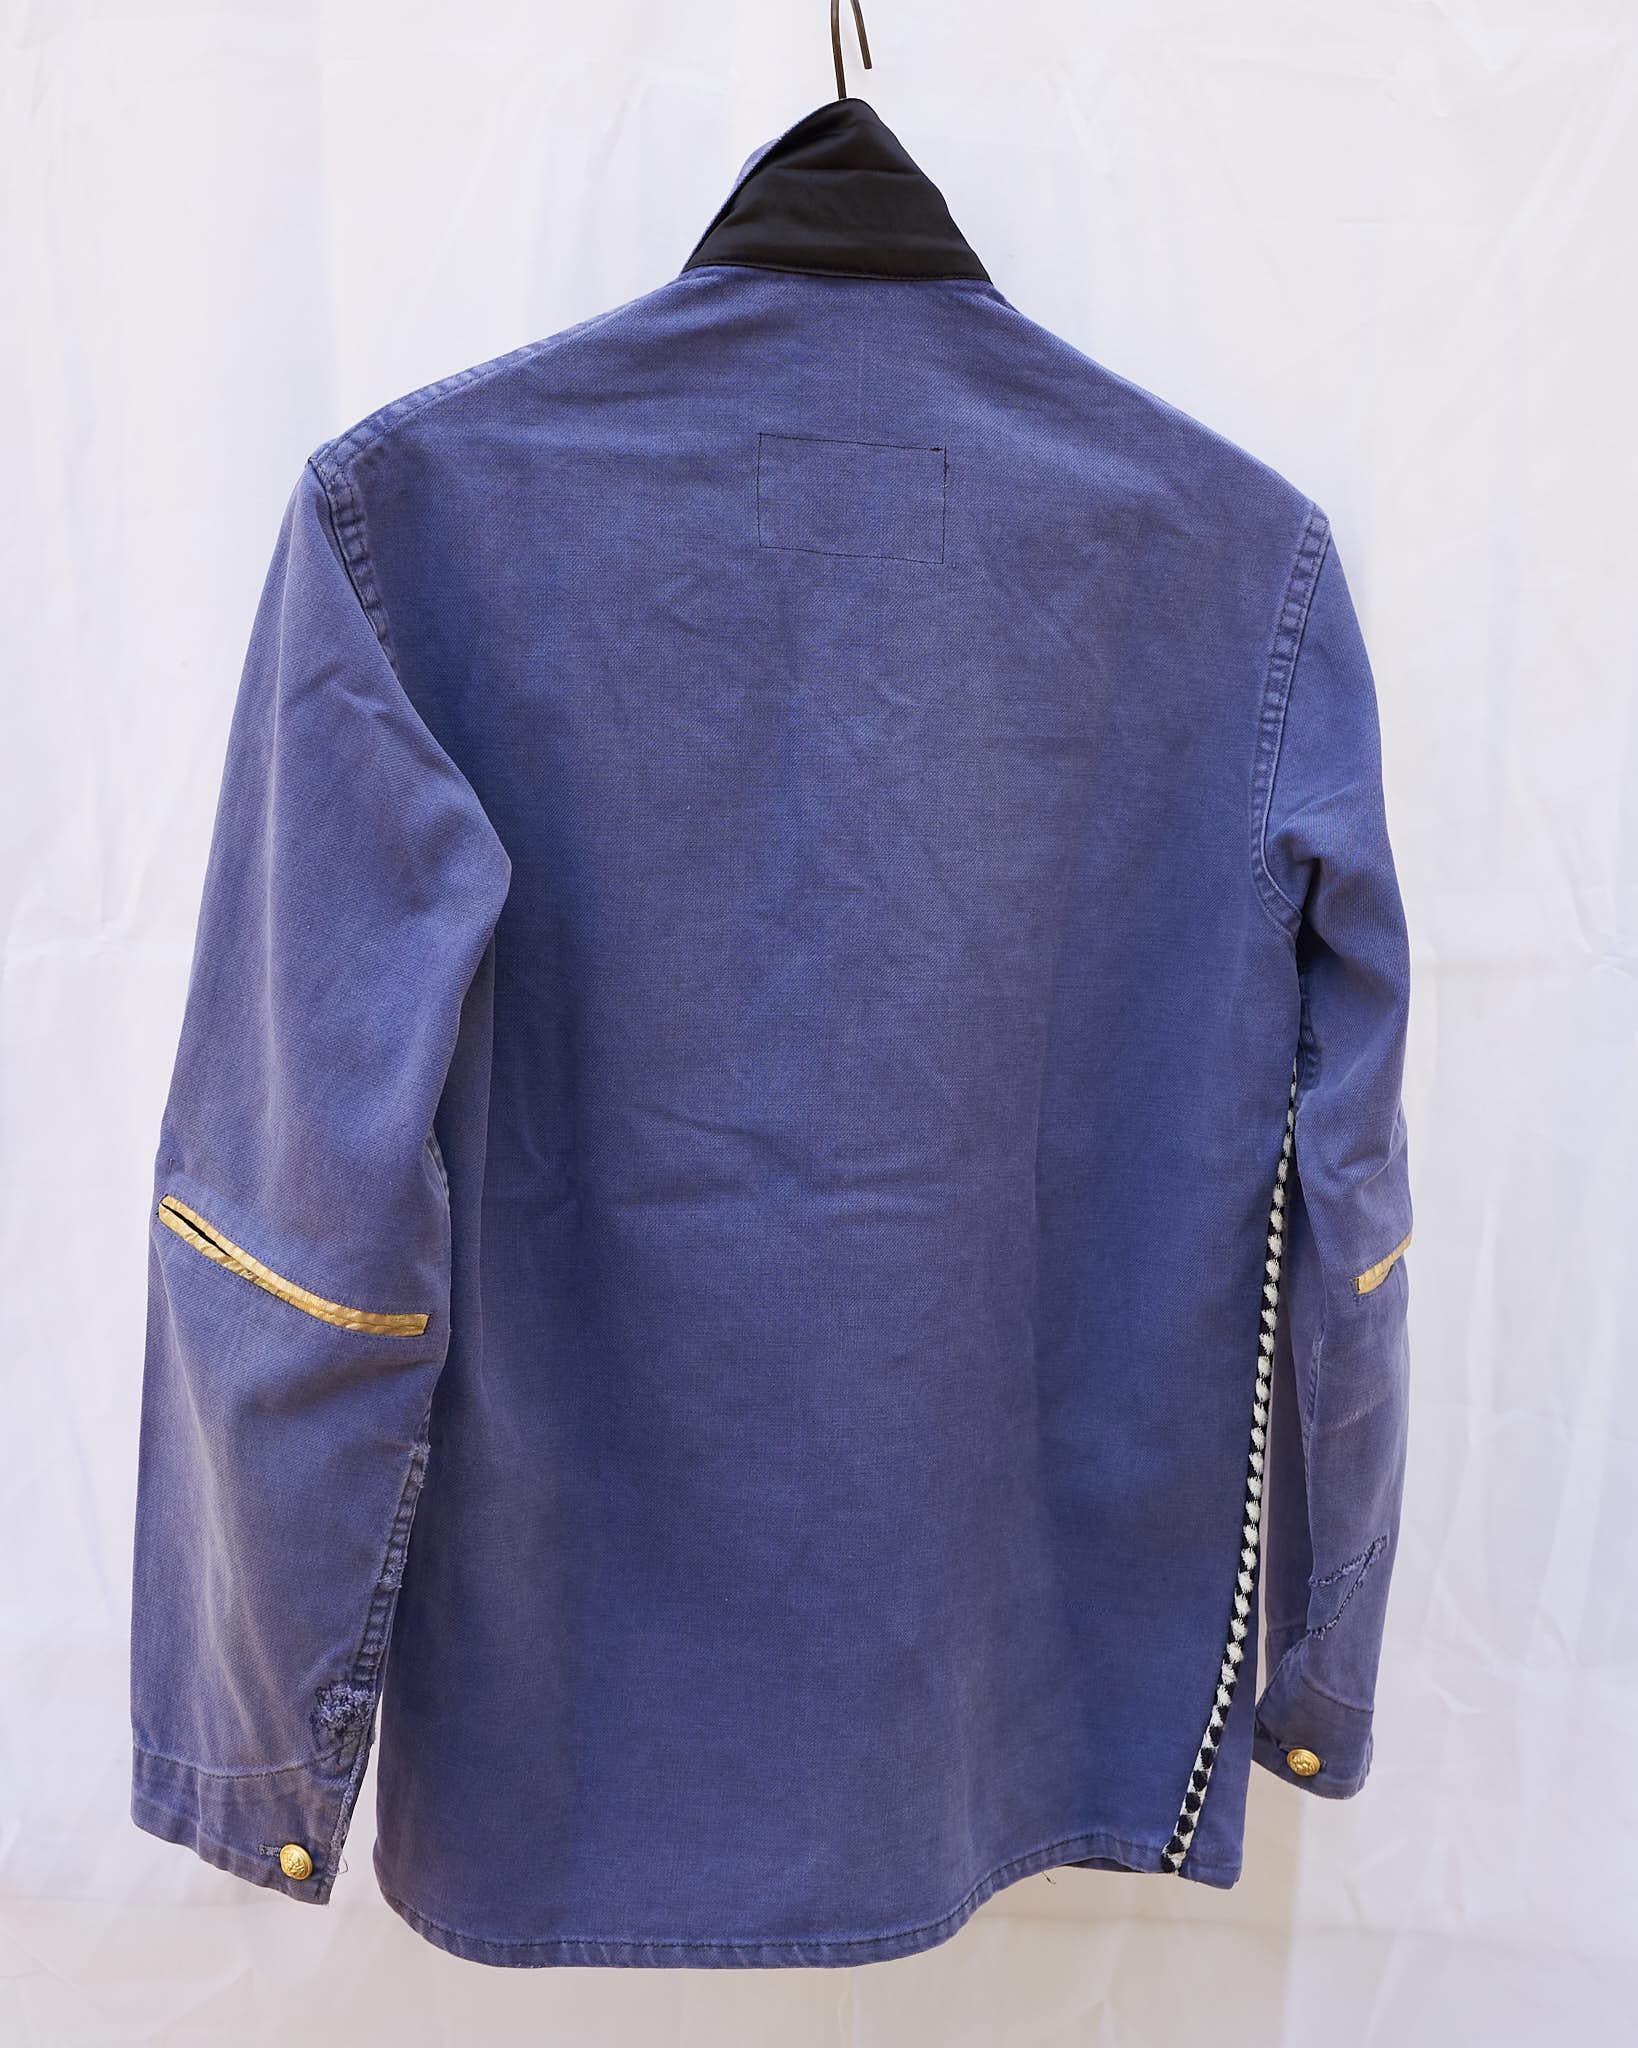 Jacket Blue French Workwear Distressed Glitter Blue Gold Buttons J Dauphin 2